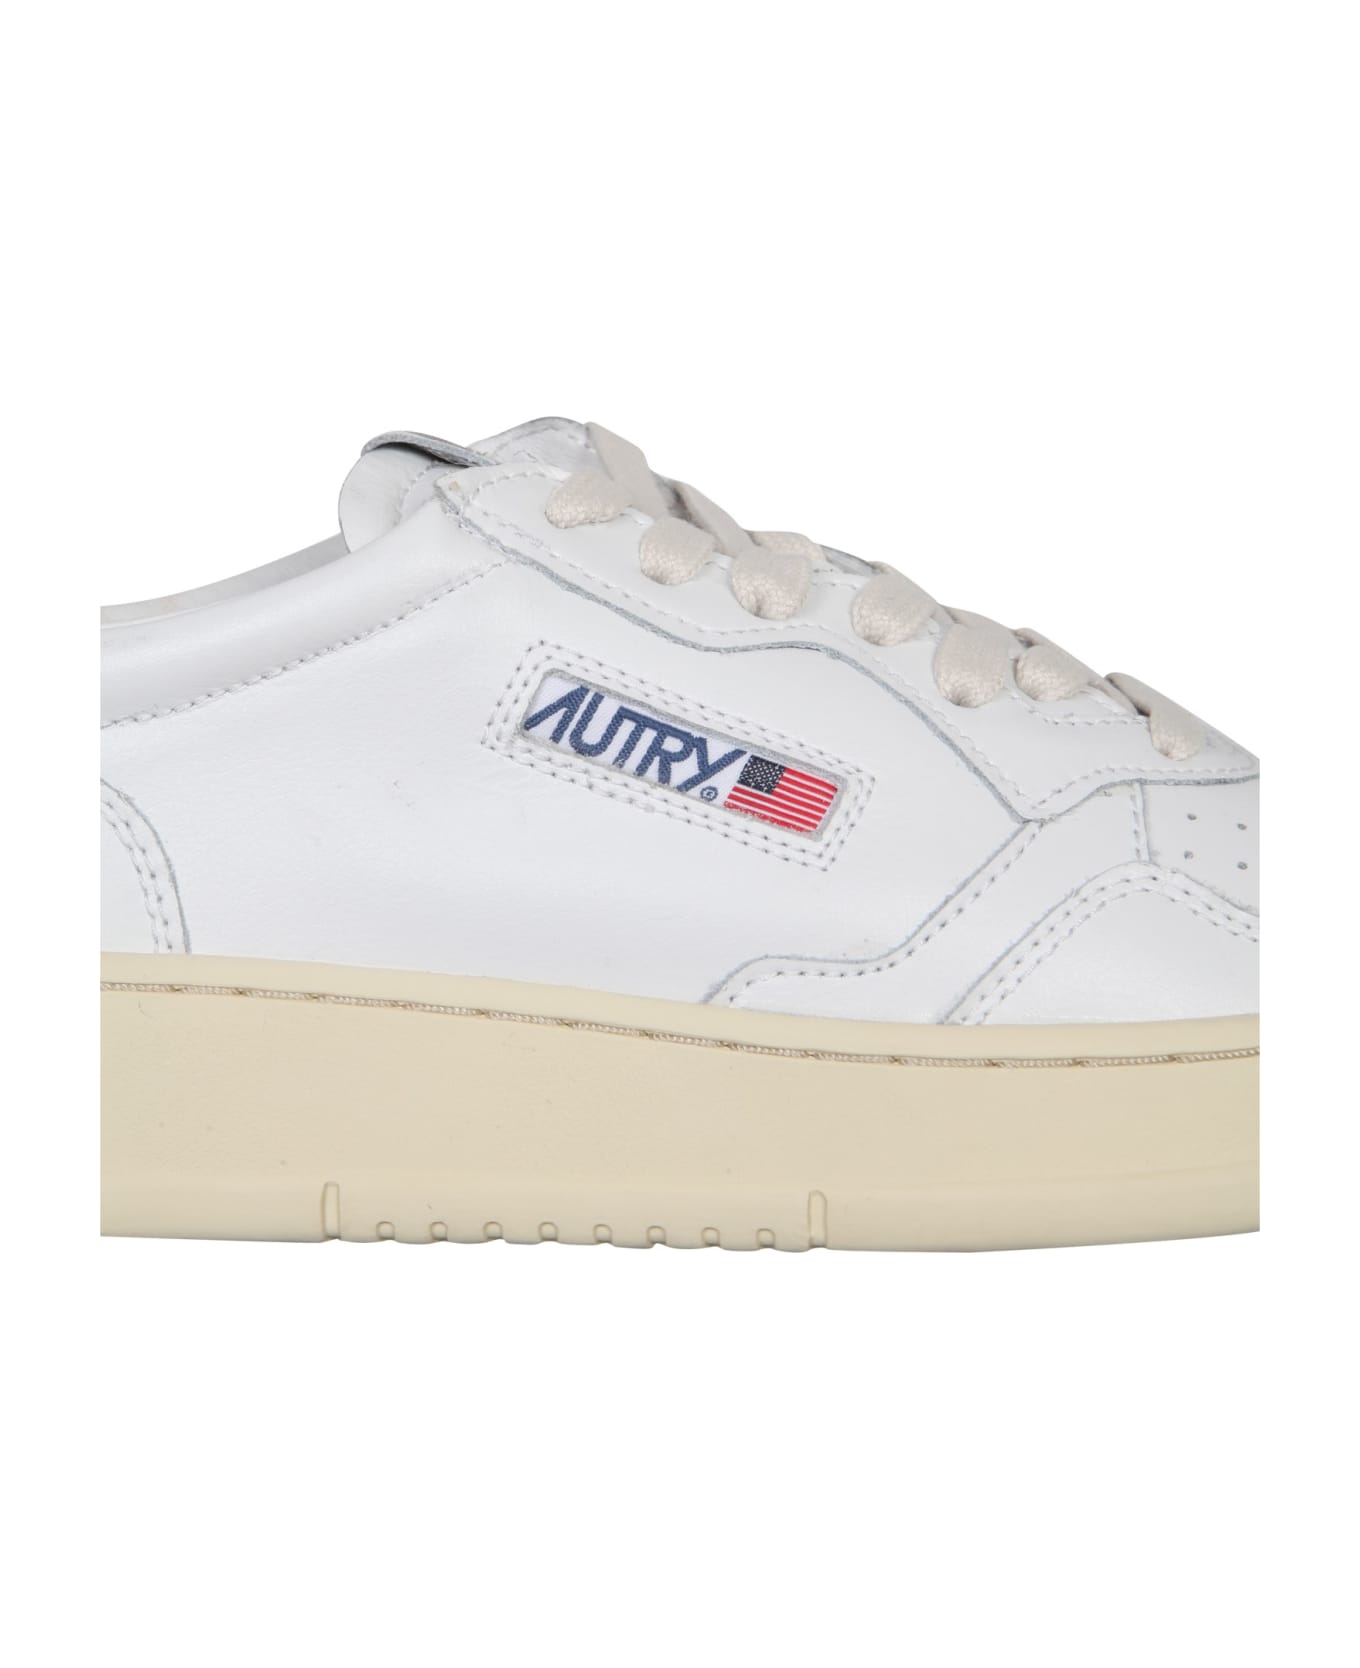 Autry Leather Sneakers